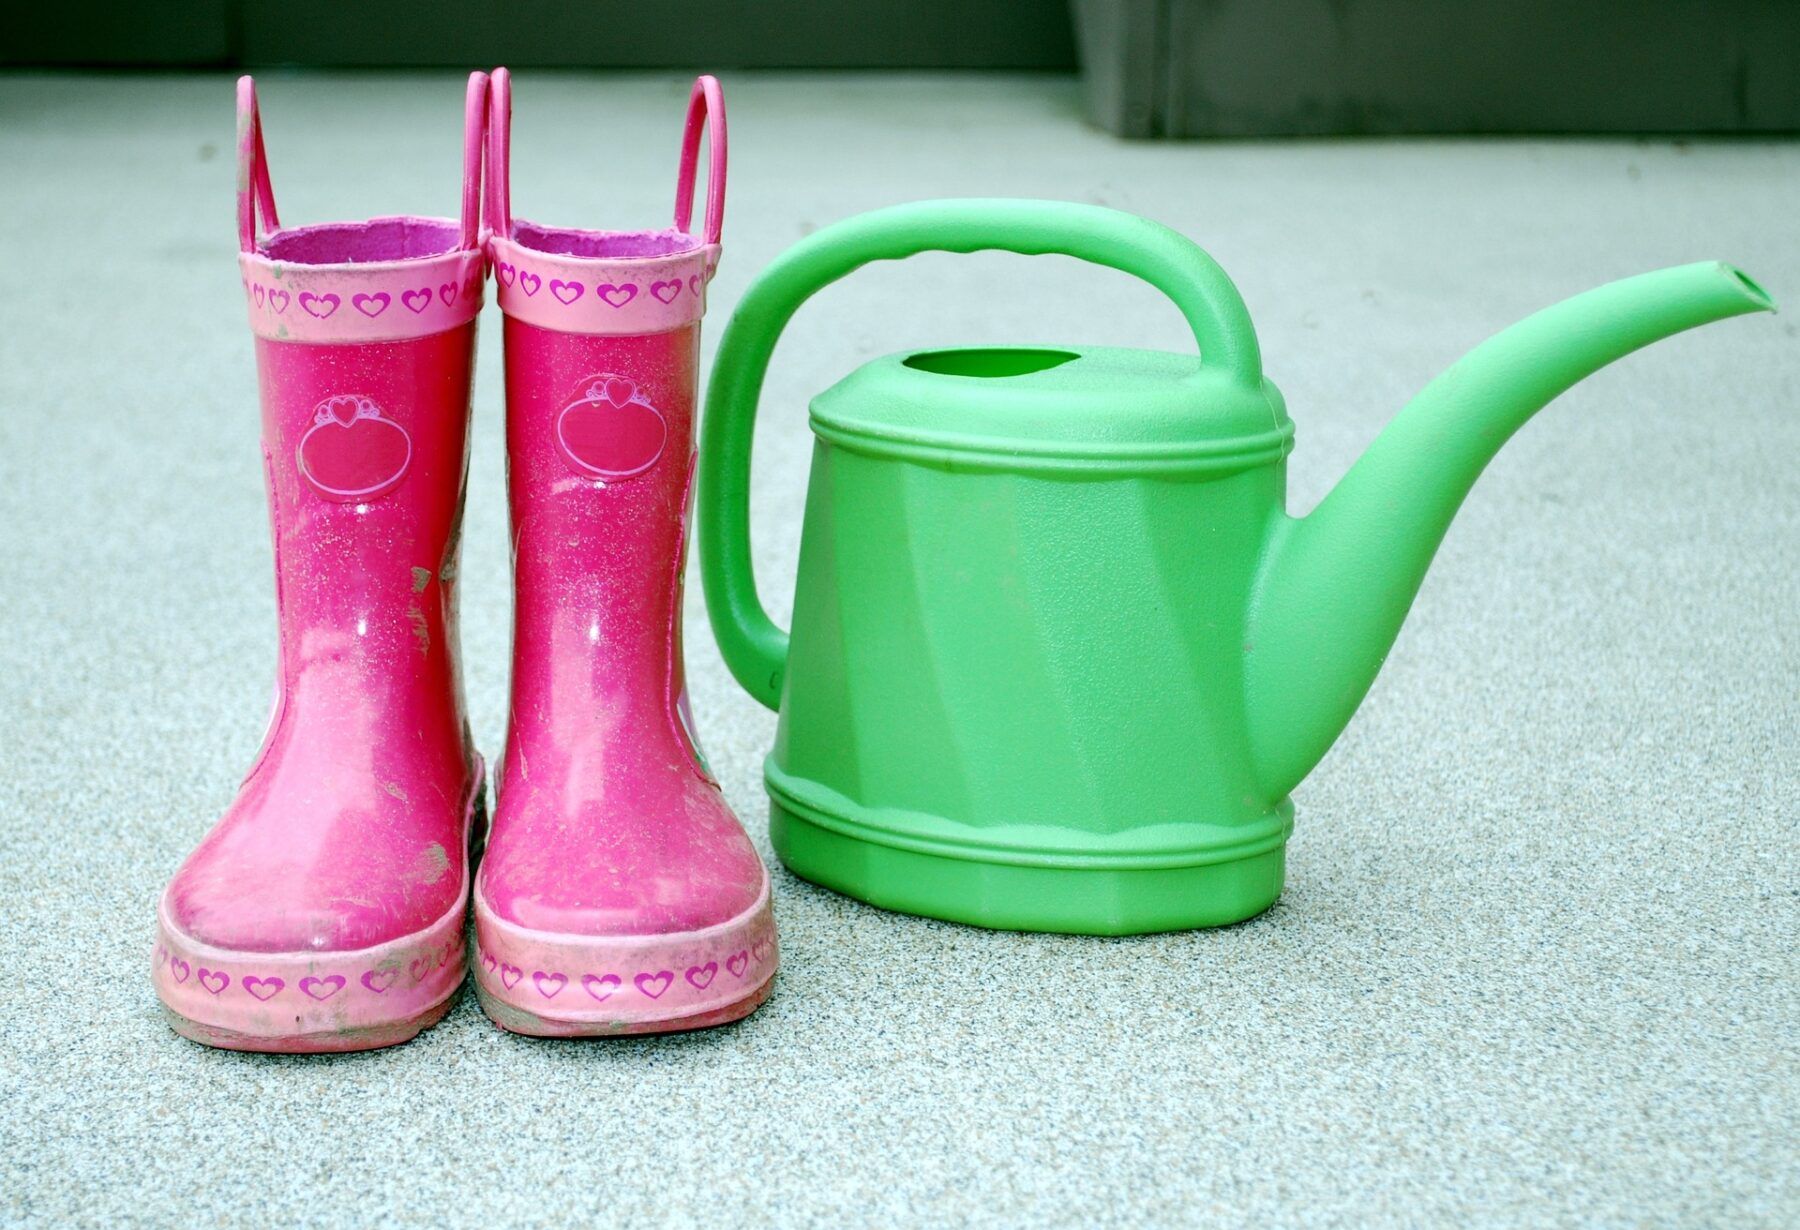 Garden wellies and a watering can.